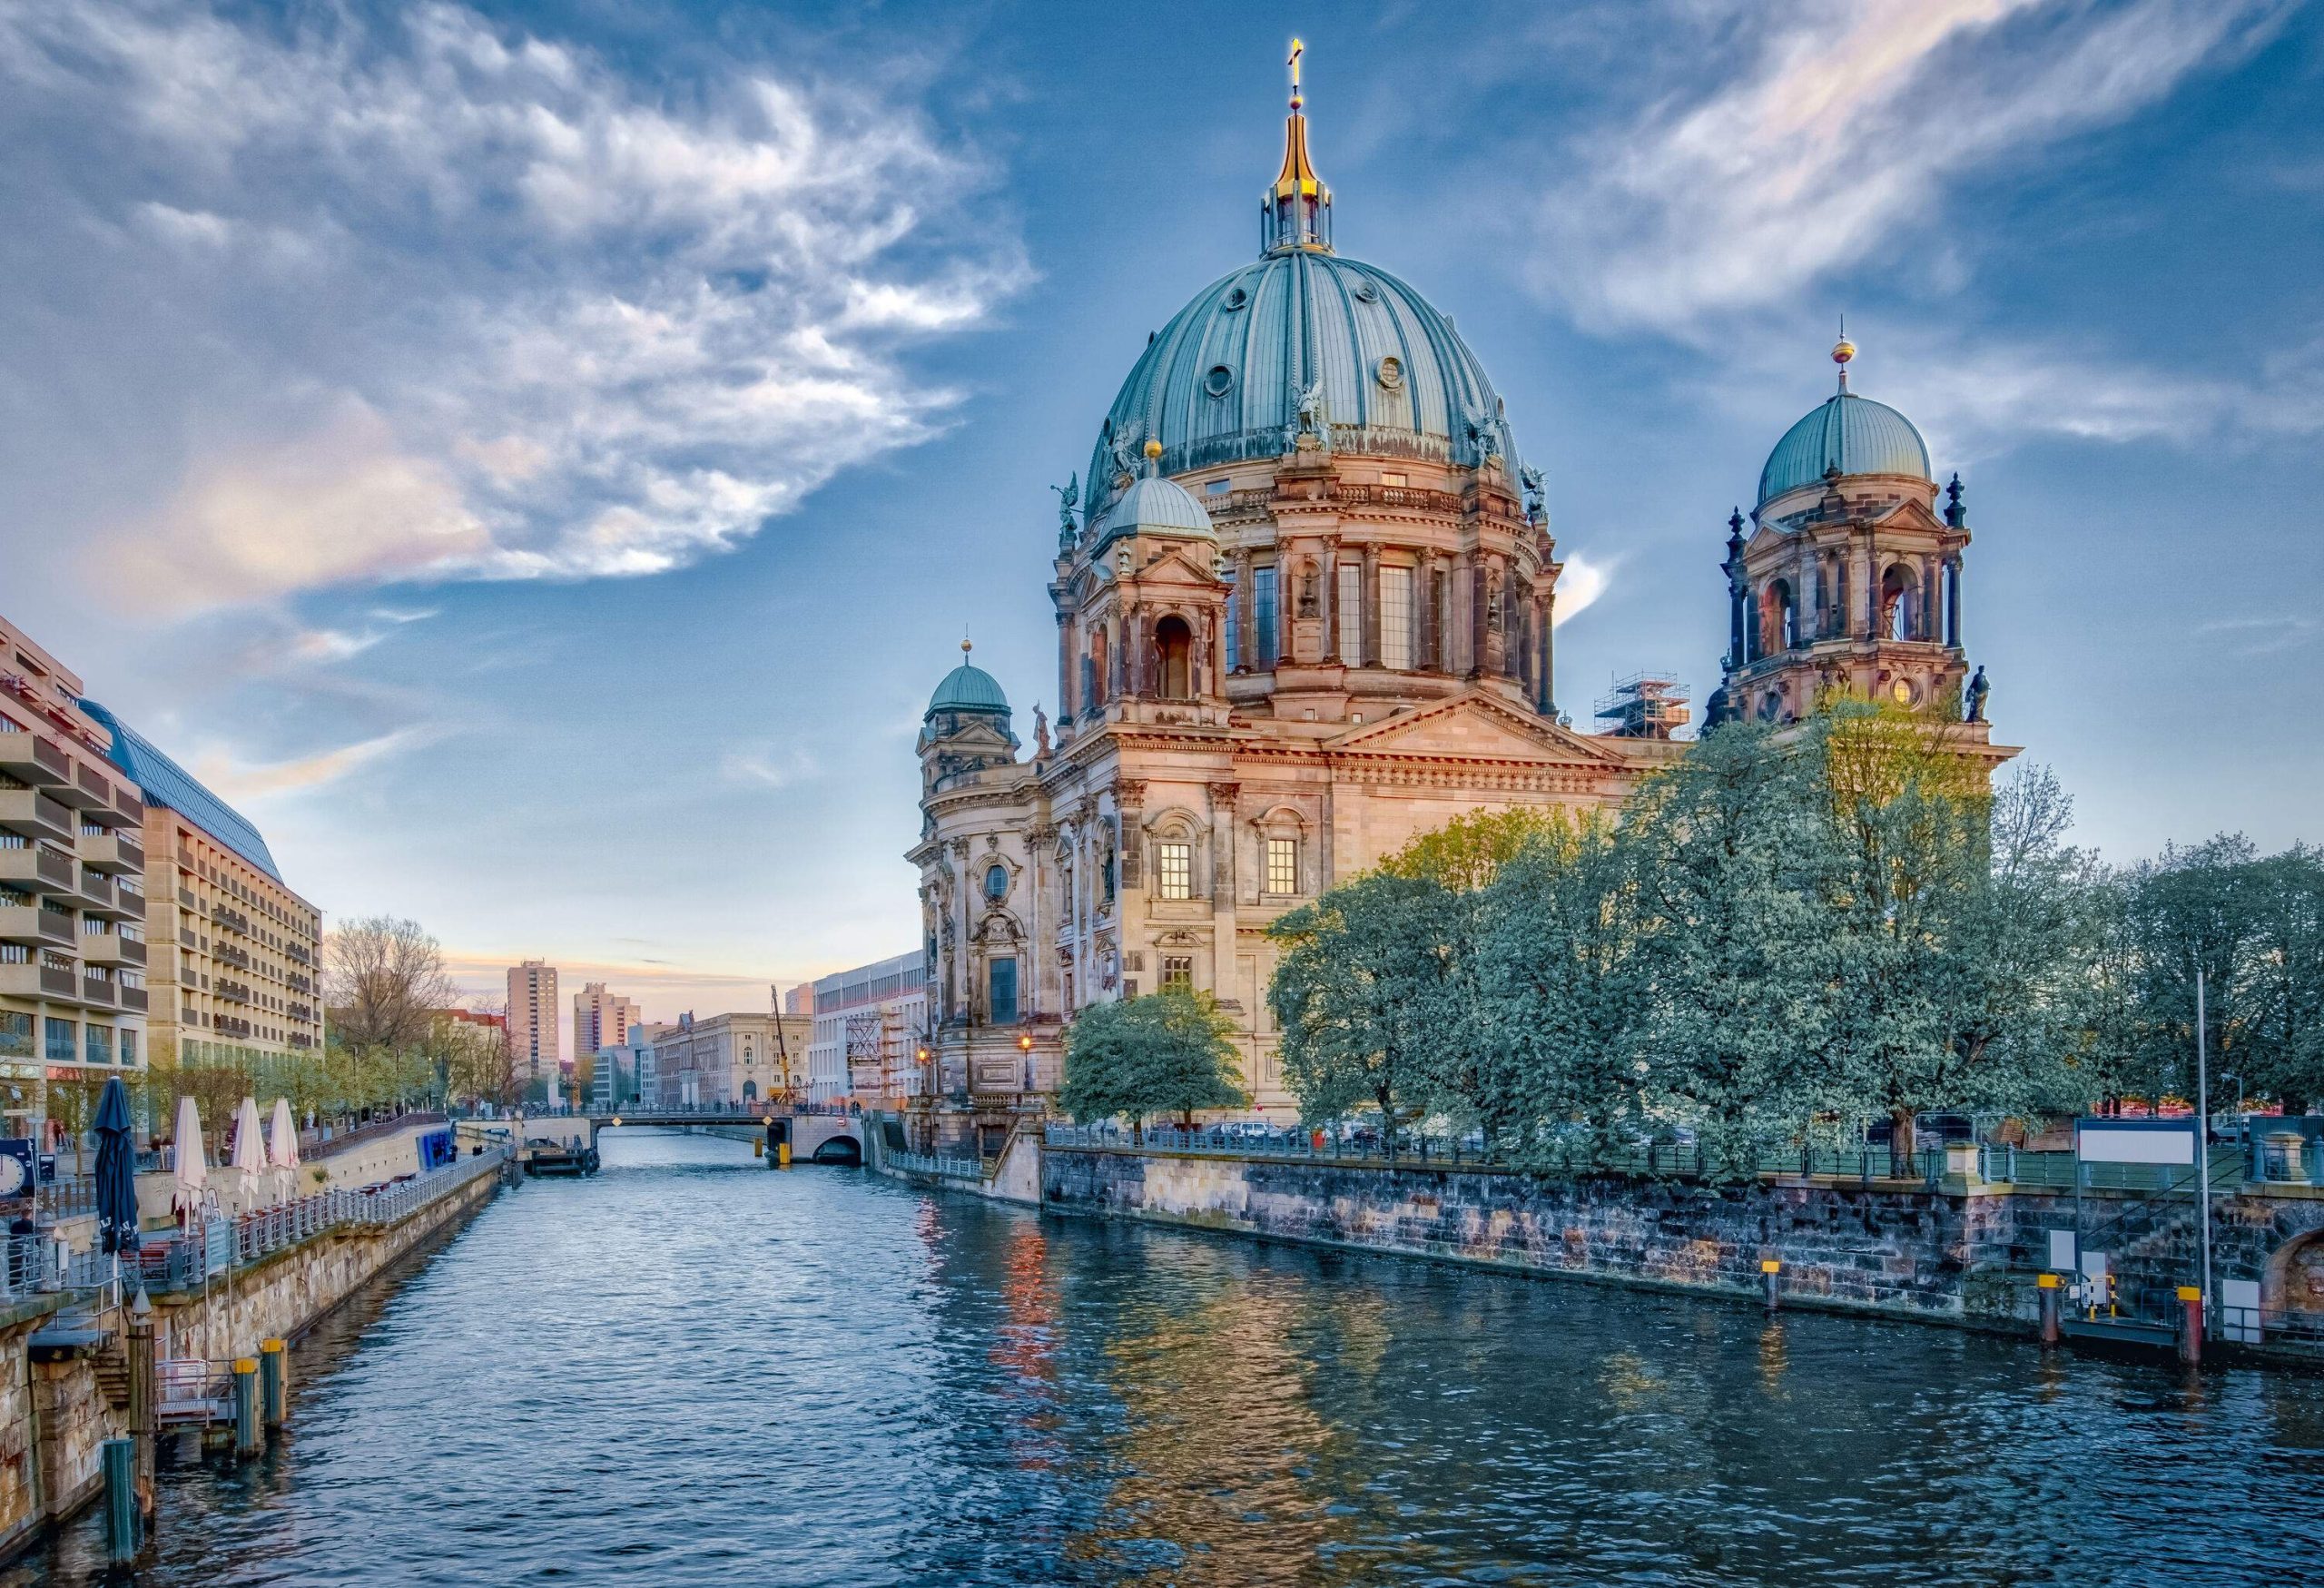 The beautiful palace-like Berlin Cathedral on the riverbank with dramatic blue sky.